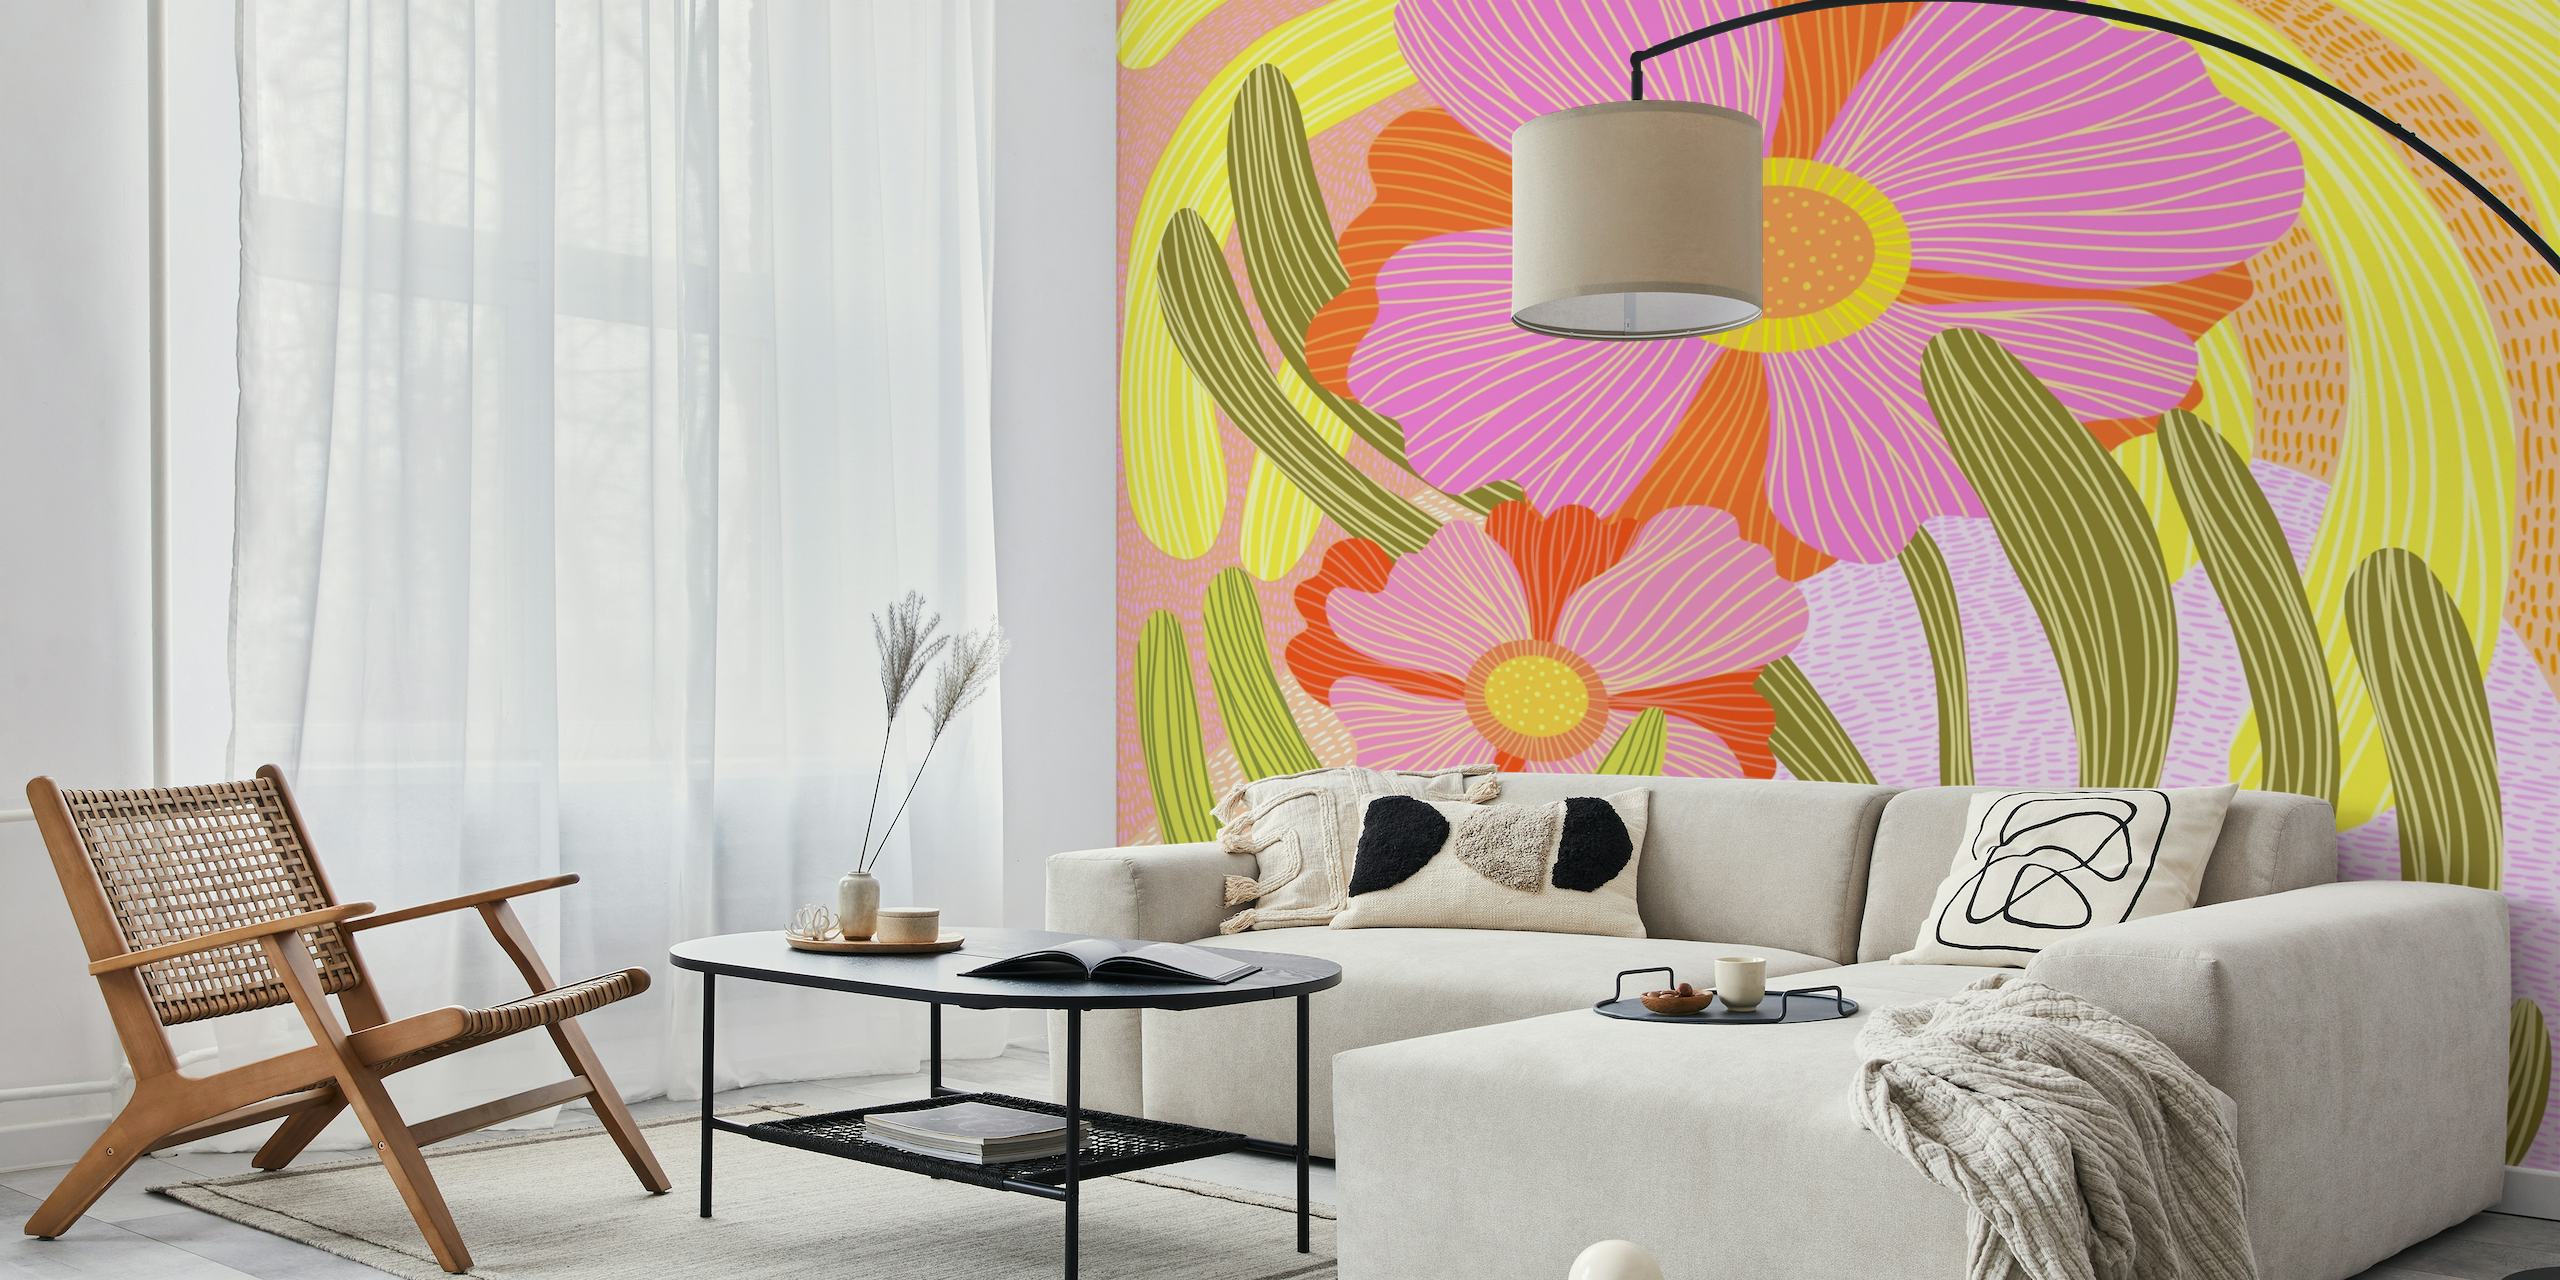 Stylized contemporary floral wall mural with pink, yellow, and green motifs